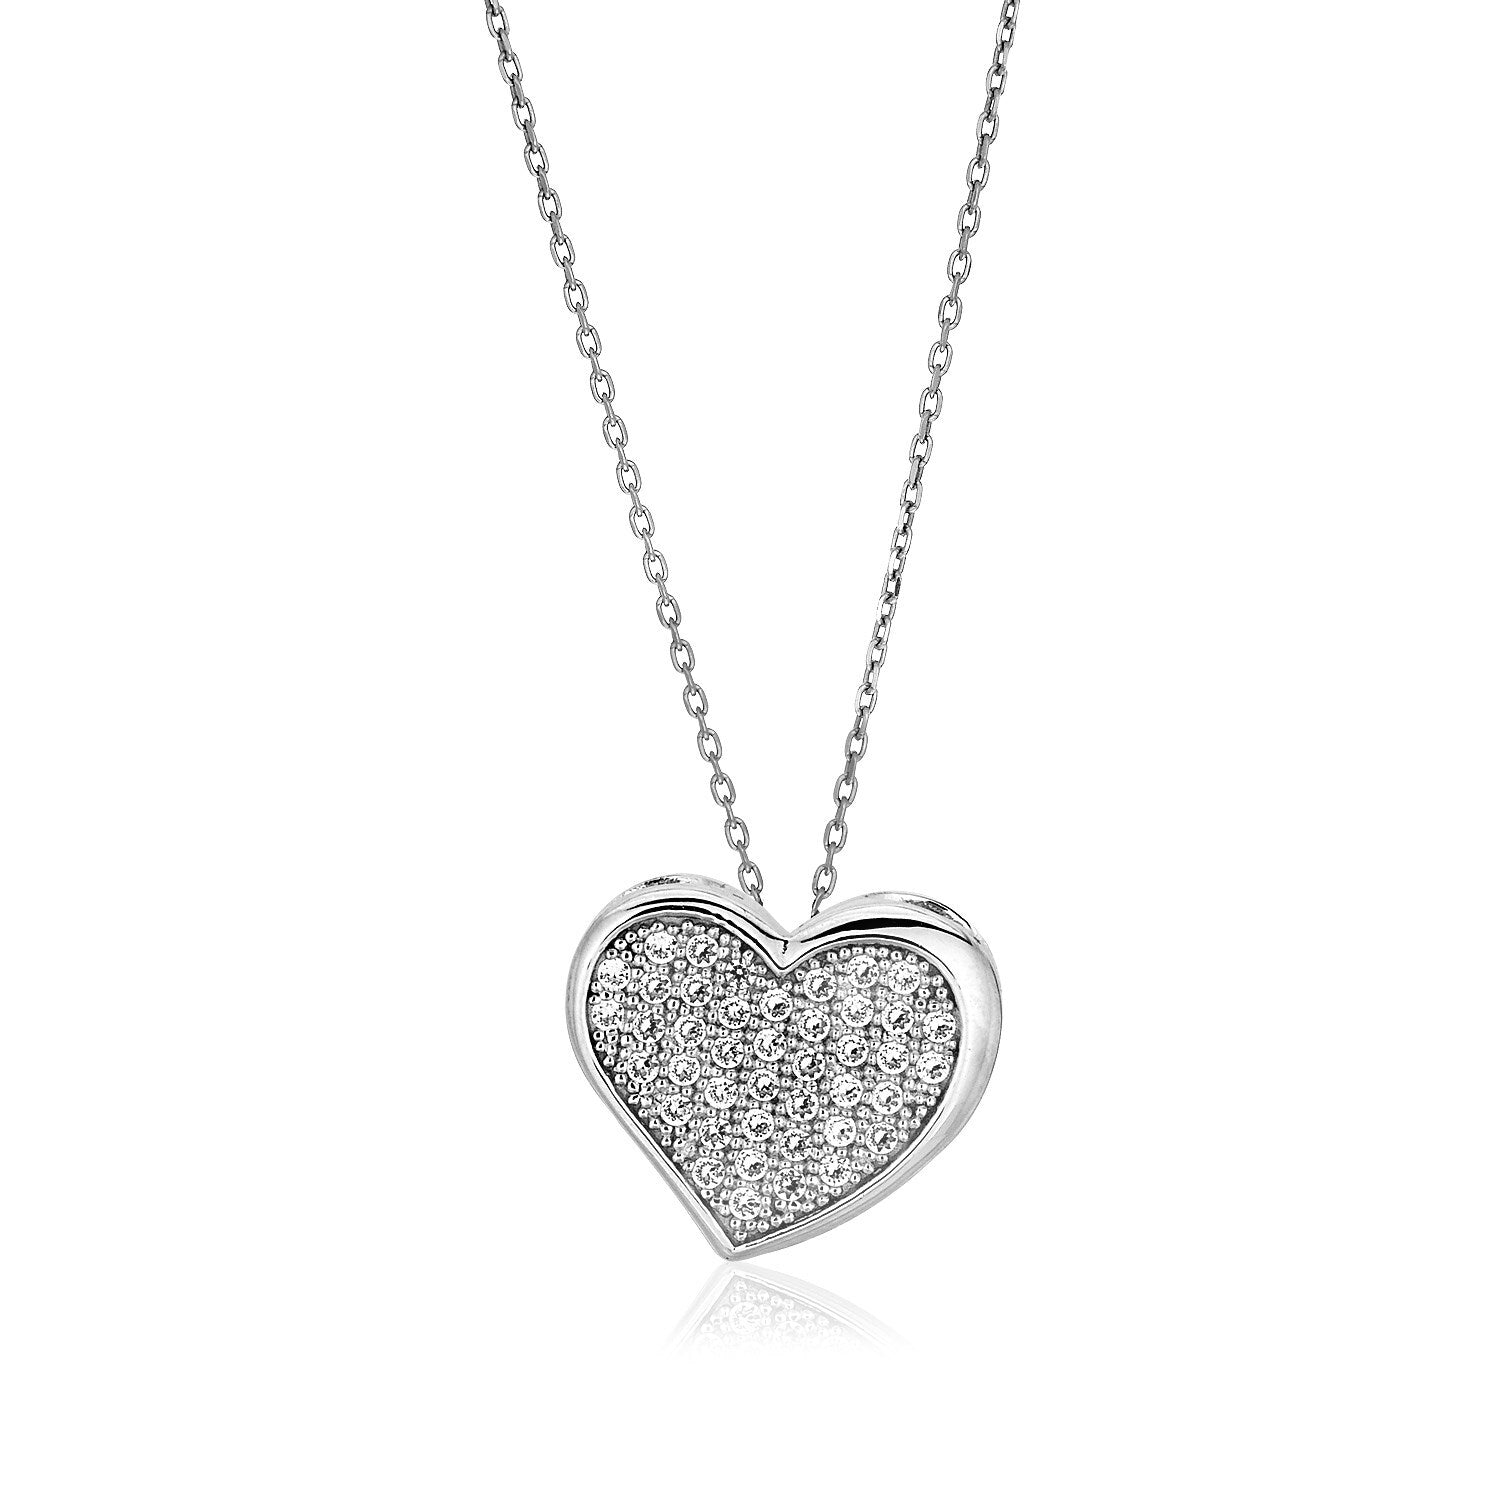 Sterling Silver Heart Necklace with Cubic Zirconias, size 18''